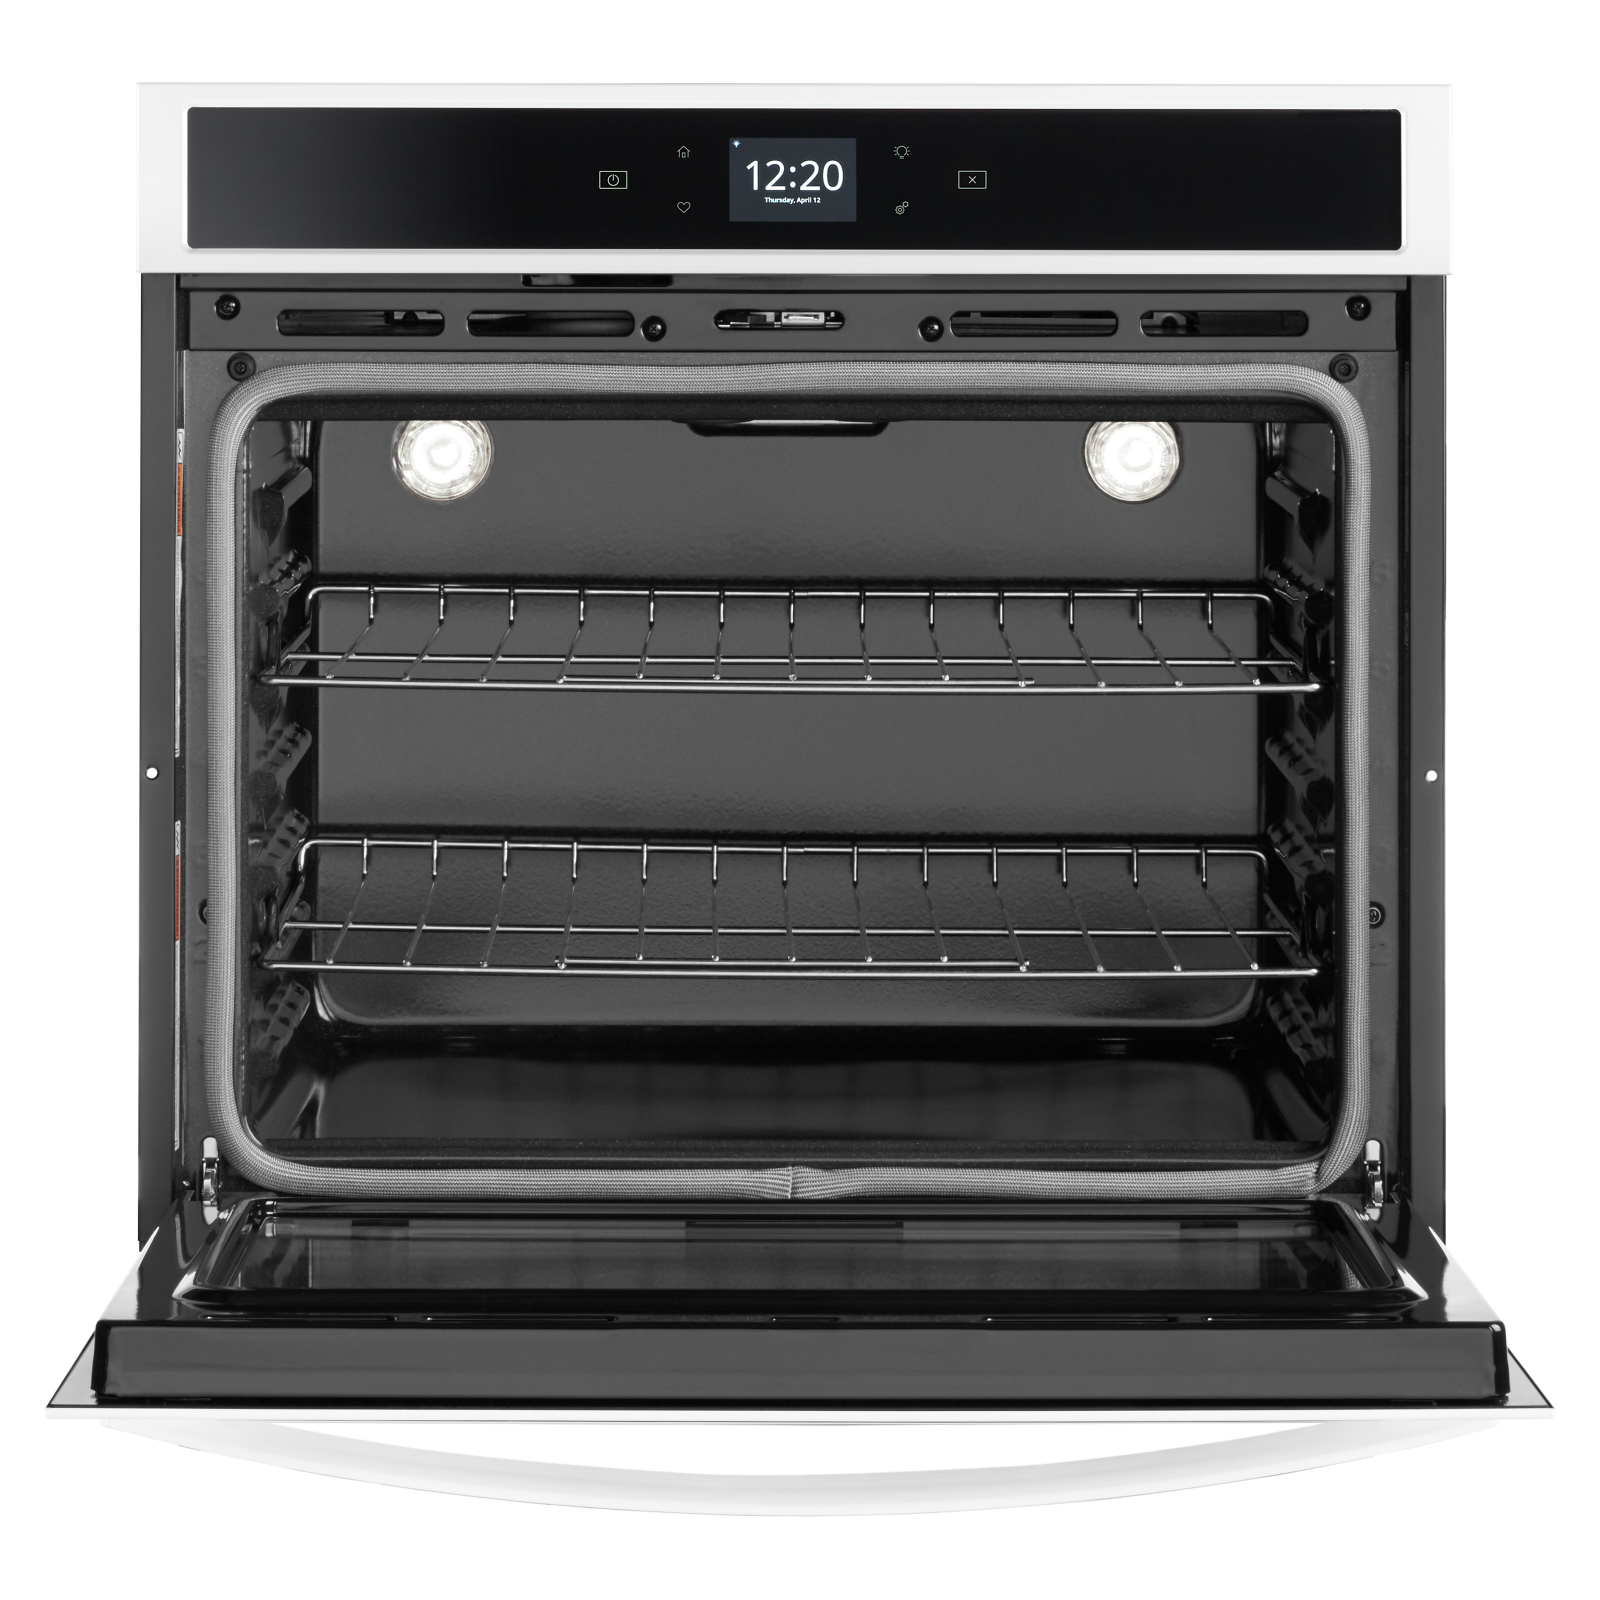 Whirlpool - 4.3 cu. ft Single Wall Oven in White - WOS51EC7HW